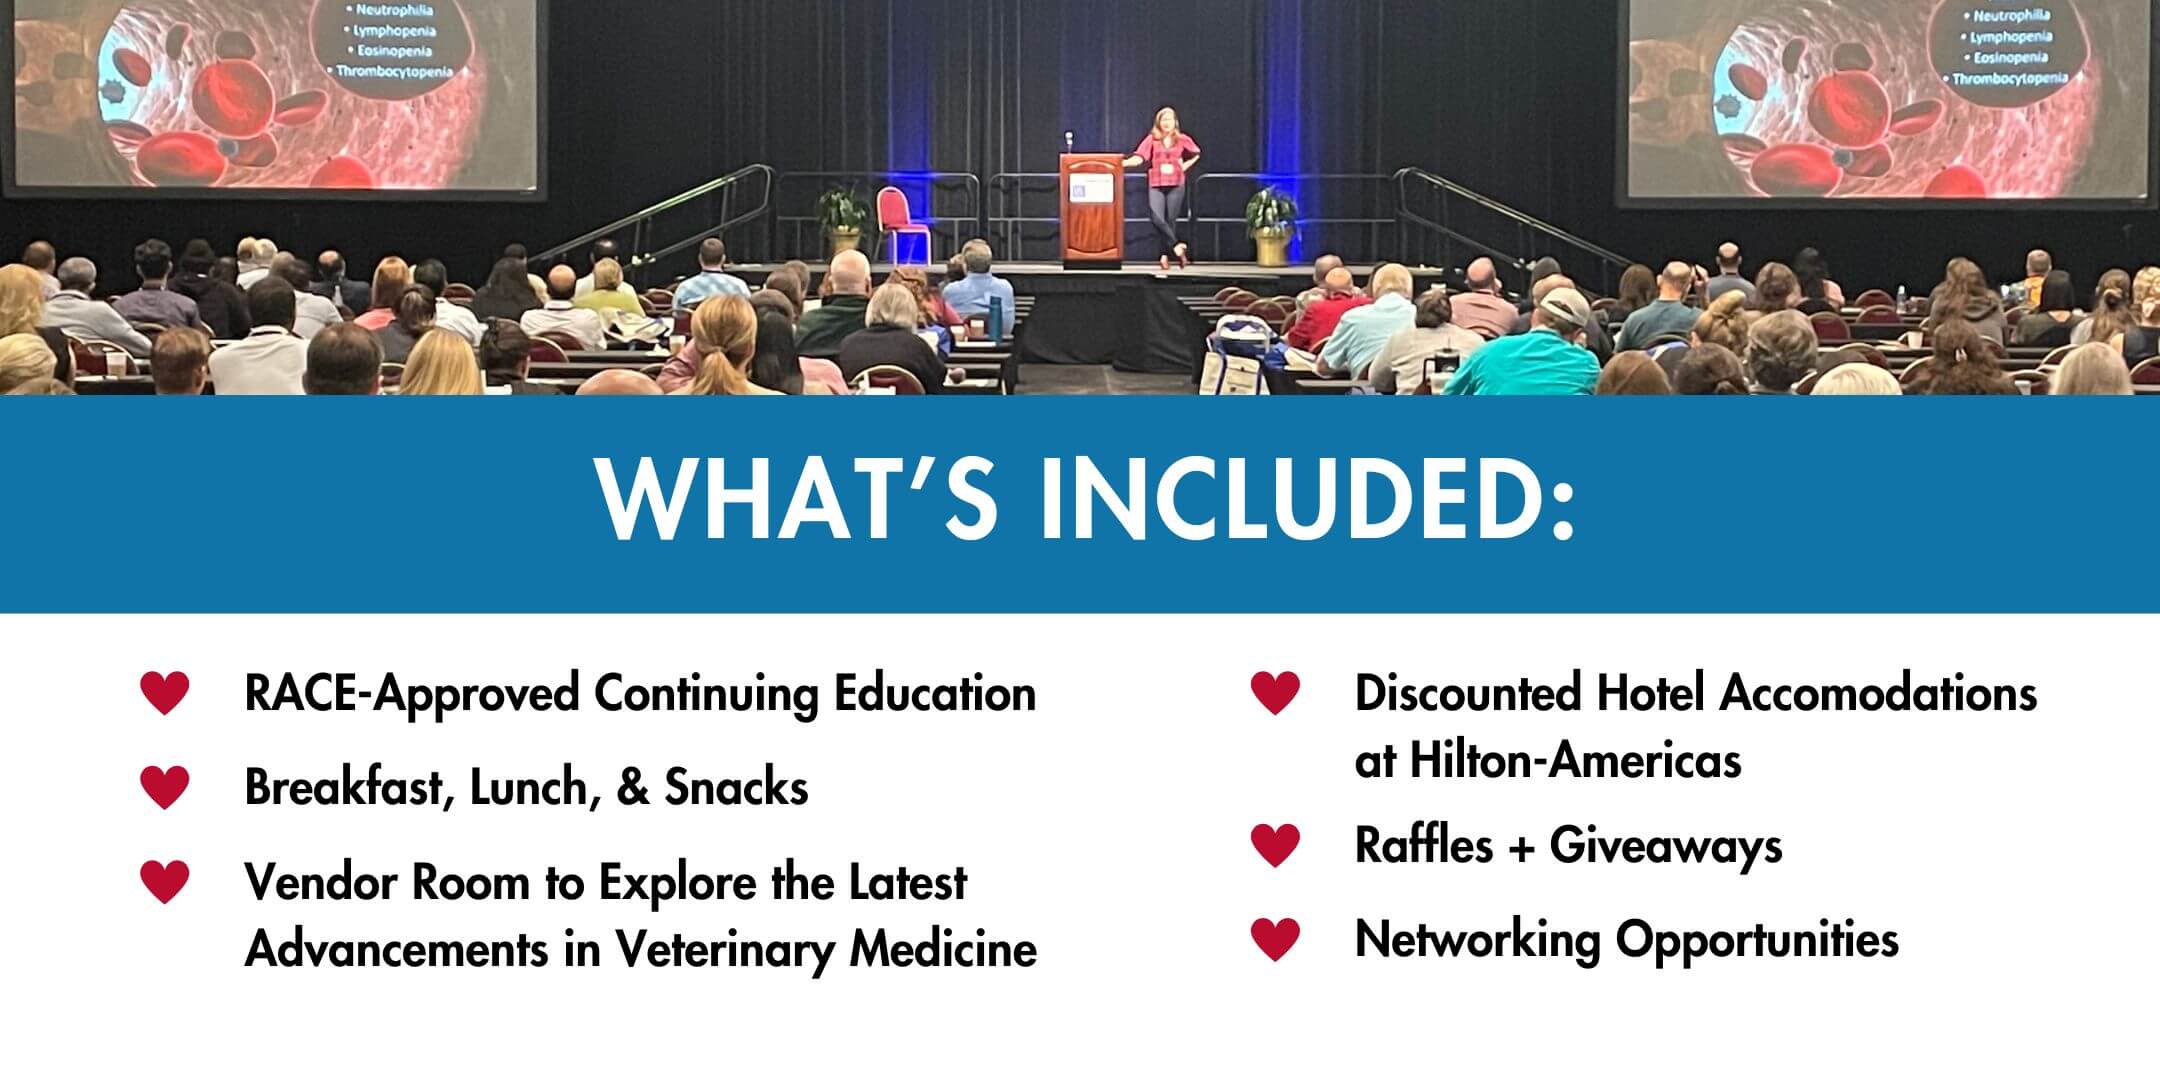 WHAT'S INCLUDED: RACE-Approved Continuing Education Breakfast, Lunch, & Snacks, Vendor Room to Explore the Latest Advancements in Veterinary Medicine, Discounted Hotel Accomodations at Hilton-Americas, Raffles + Giveaways, Networking Opportunities